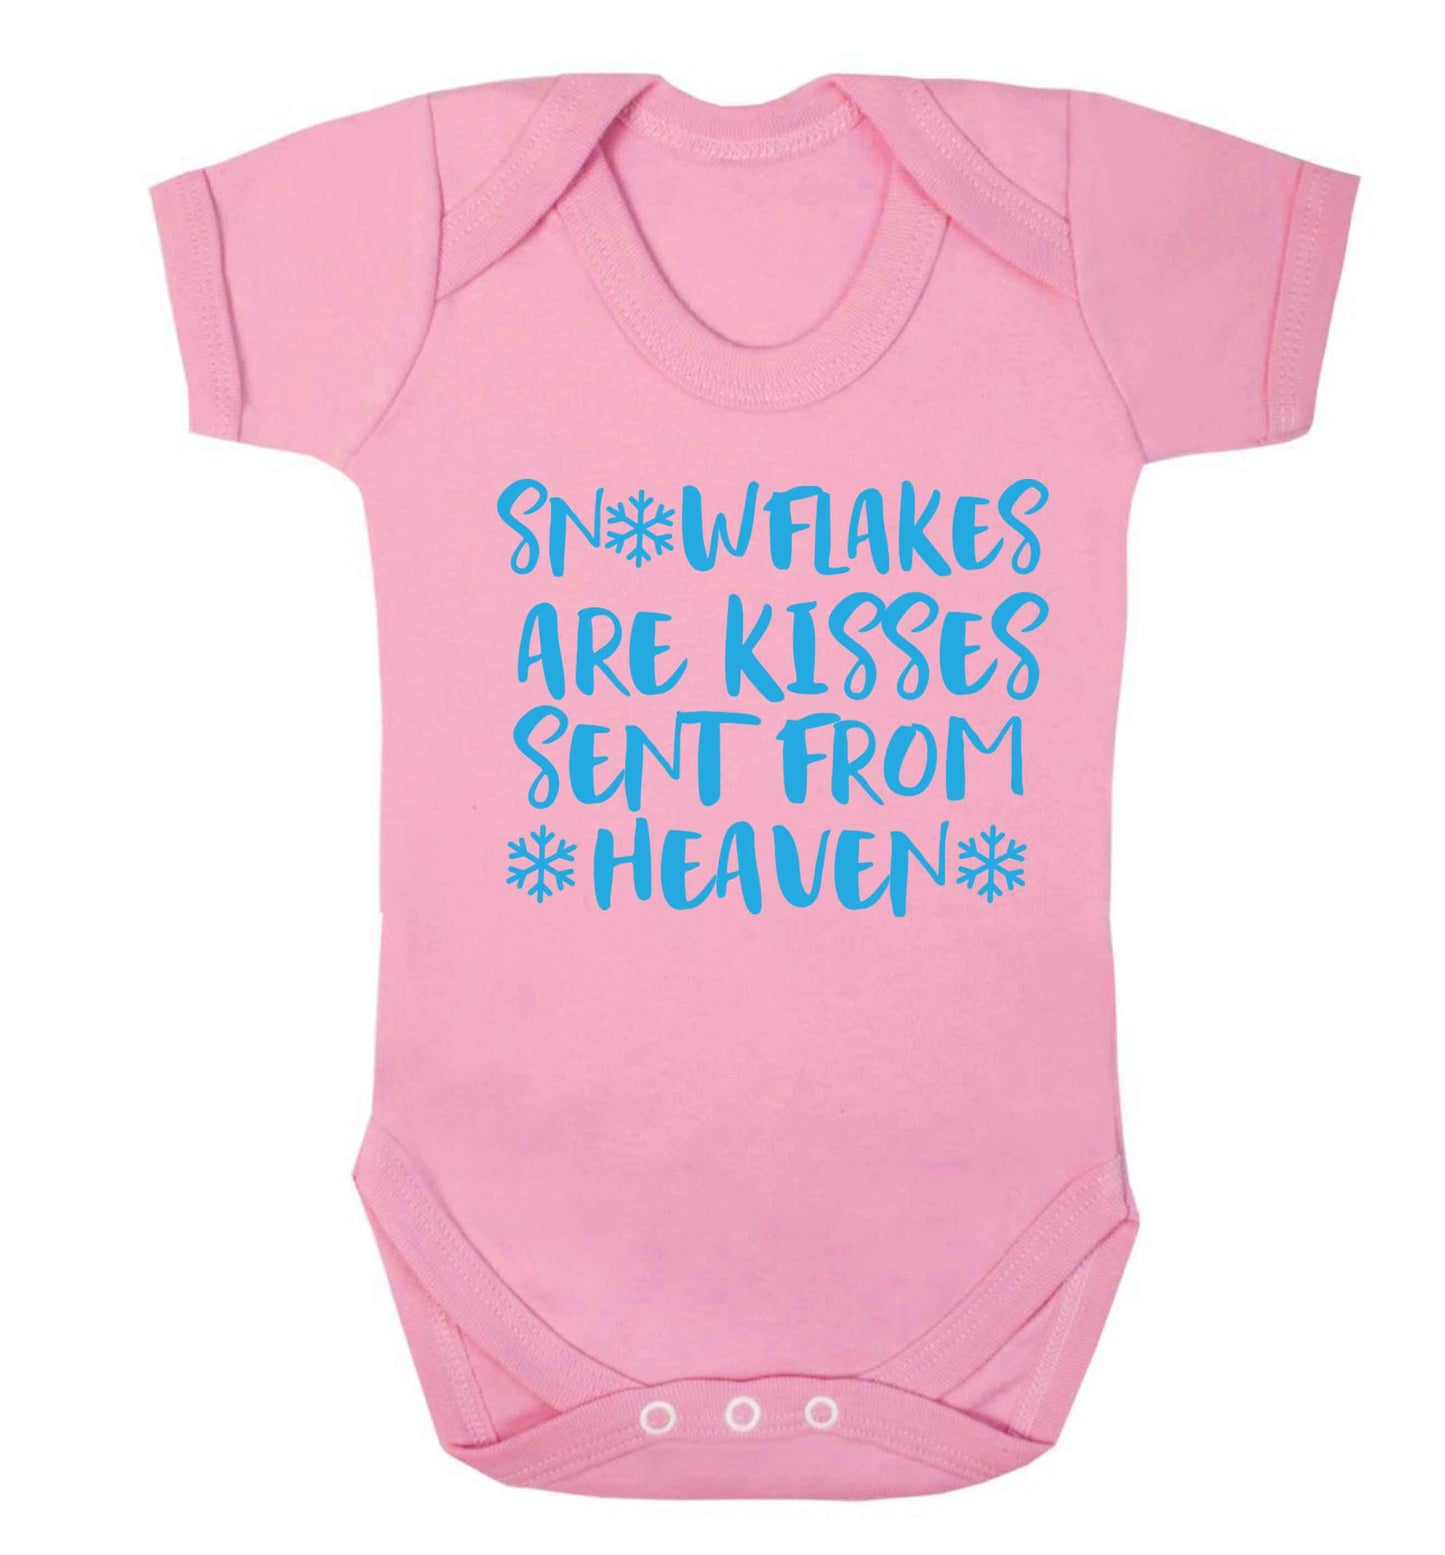 Snowflakes are kisses sent from heaven Baby Vest pale pink 18-24 months